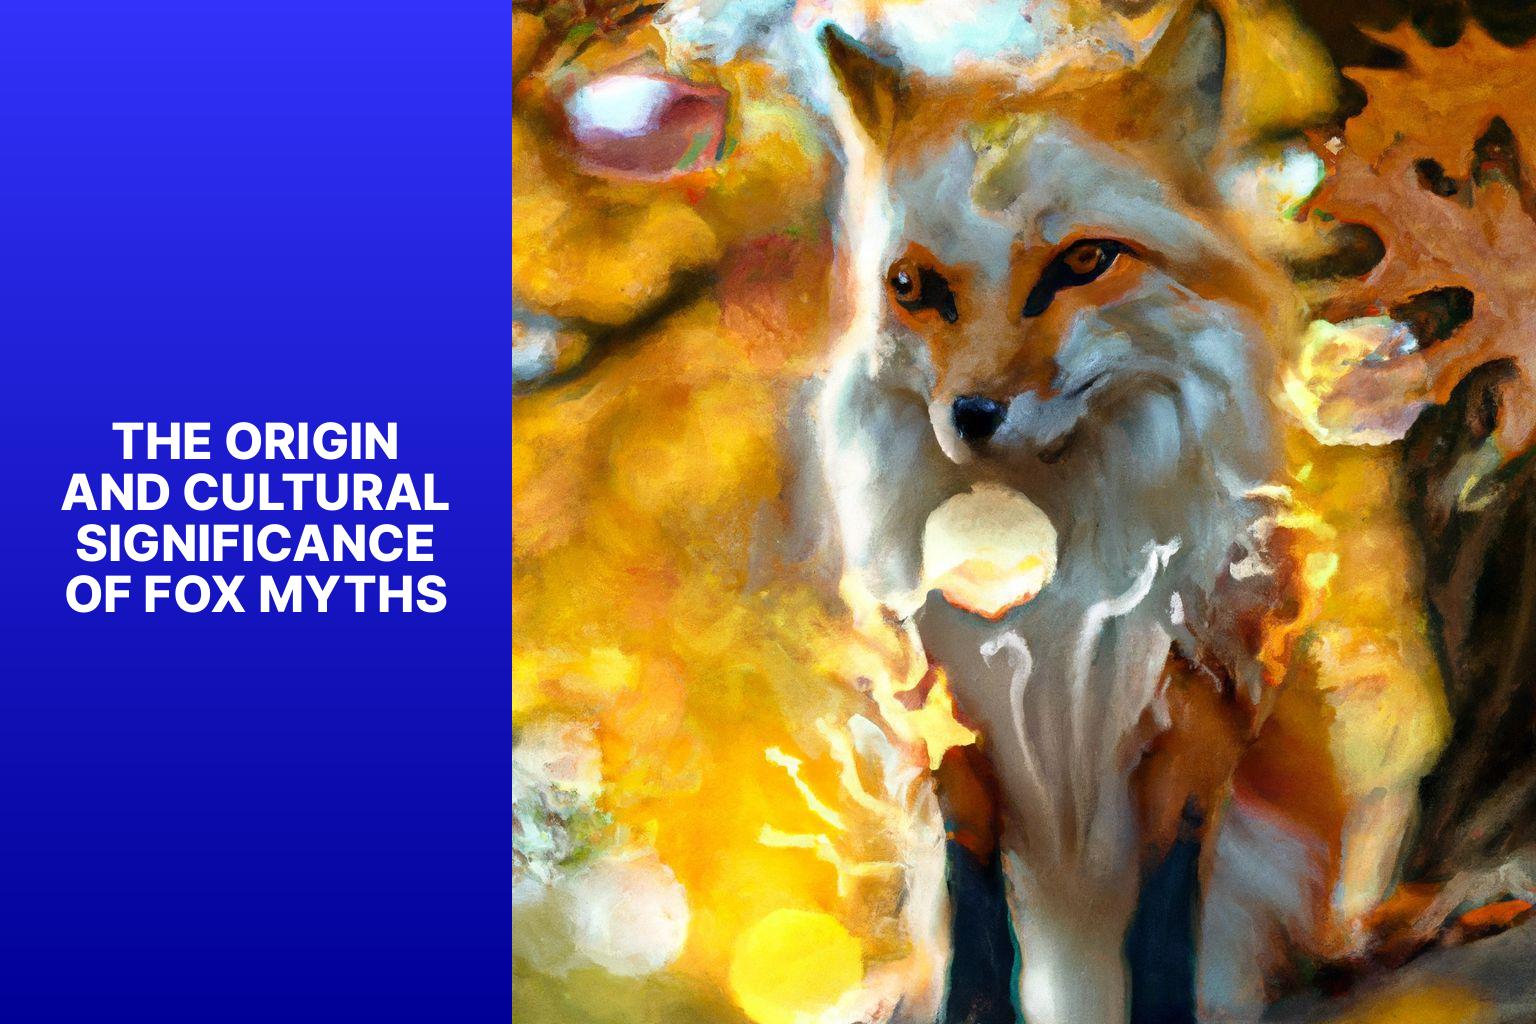 The Origin and Cultural Significance of Fox Myths - Fox Myths in Pseudohistory 